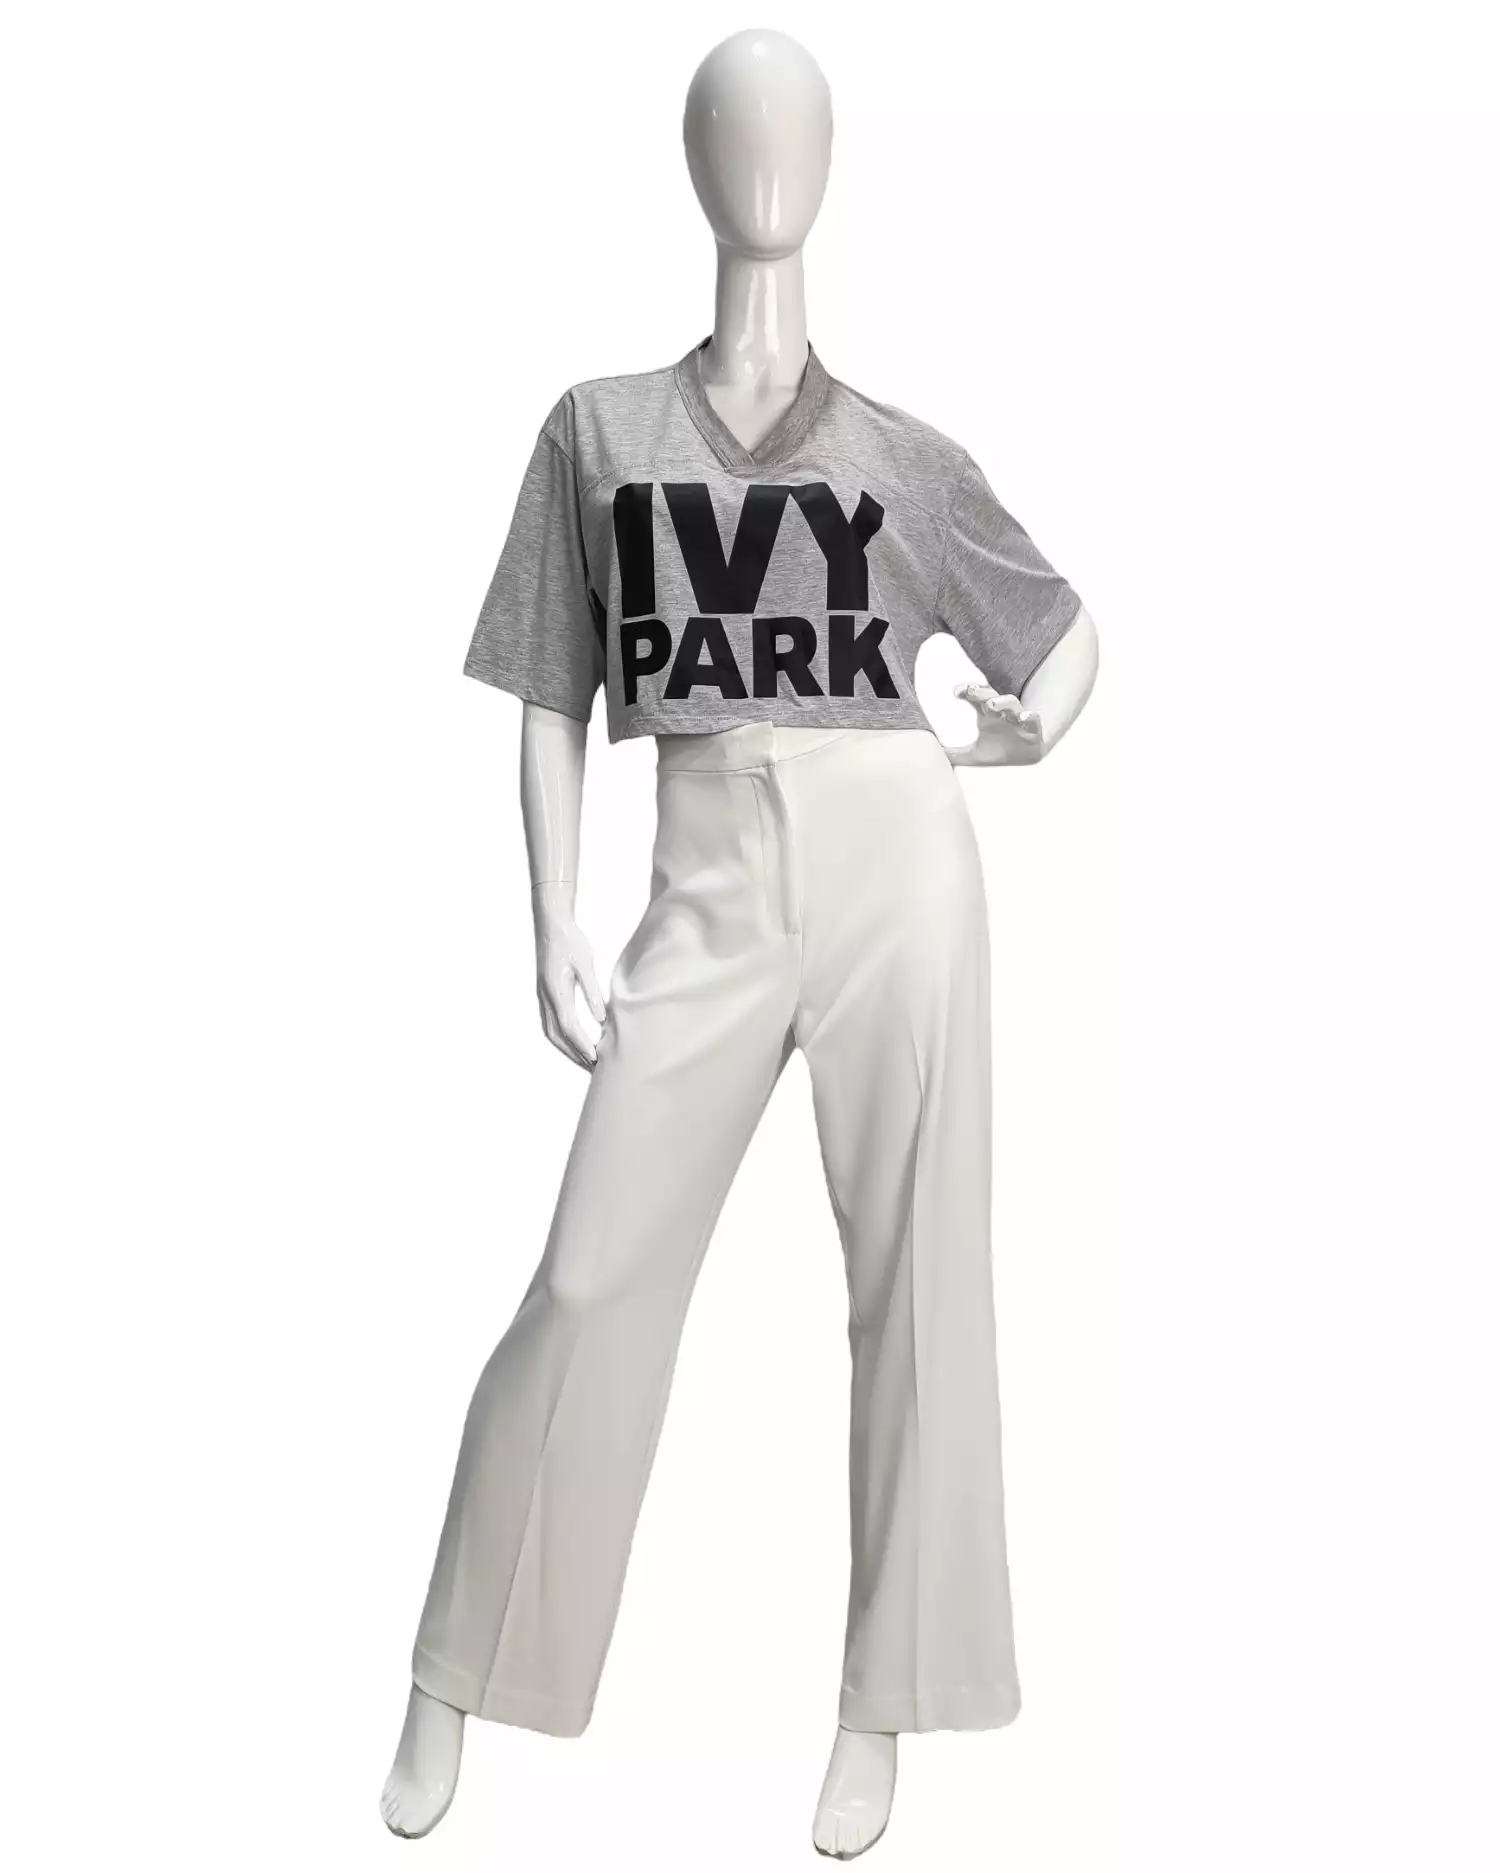 Top by Ivy Park